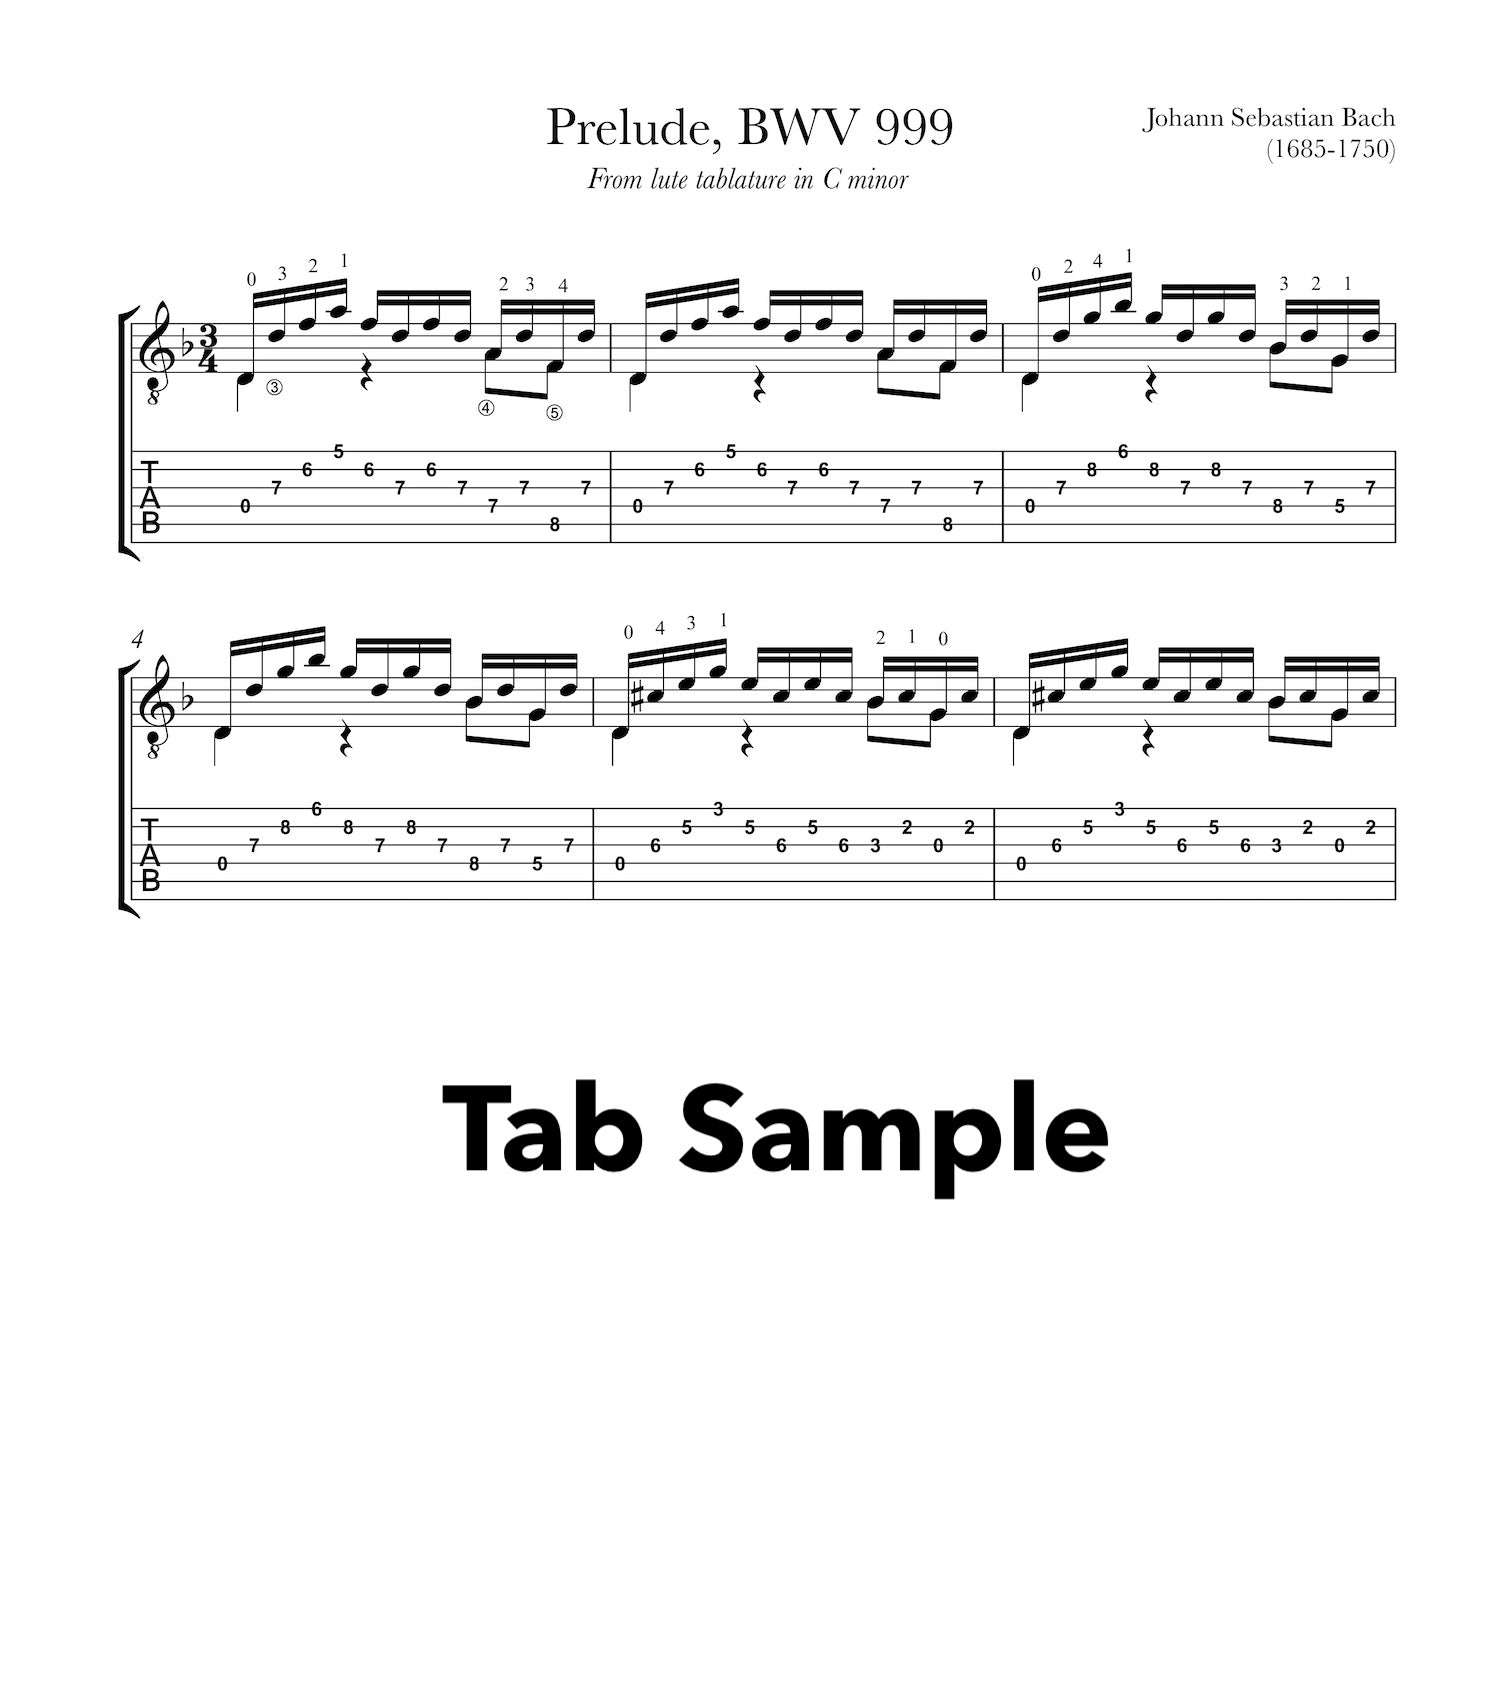 Prelude BWV 999 by Bach for Guitar (TAB Sample)